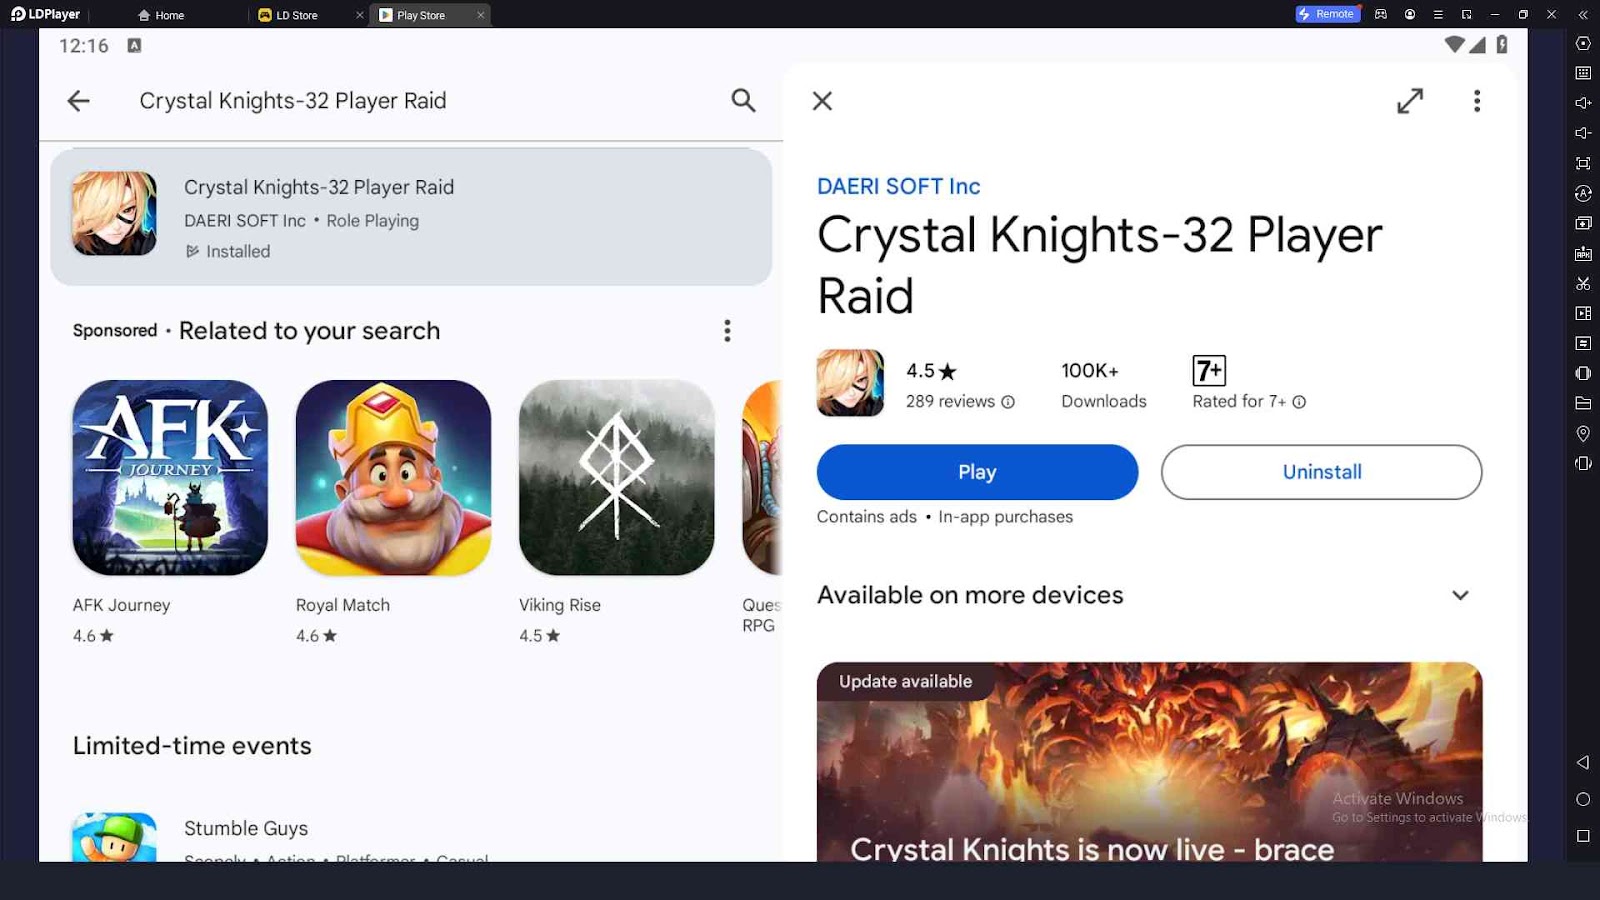 Playing Crystal Knights-32 Player Raid on PC with LDPlayer